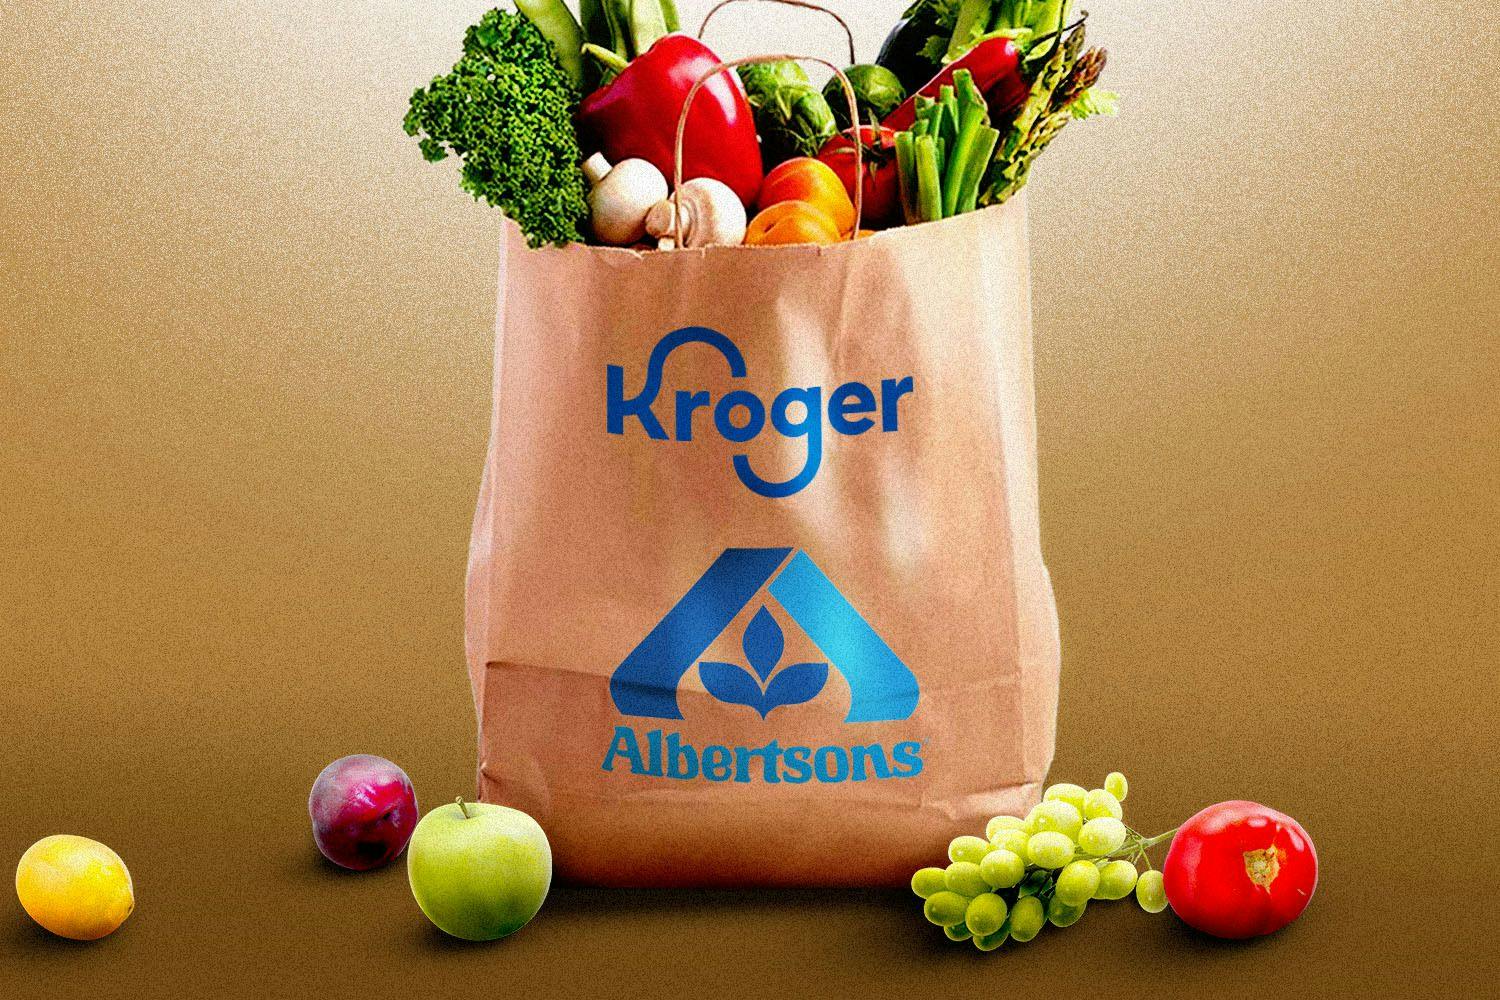 Grocery bag full of vegetables with Kroger and Albertson's logo